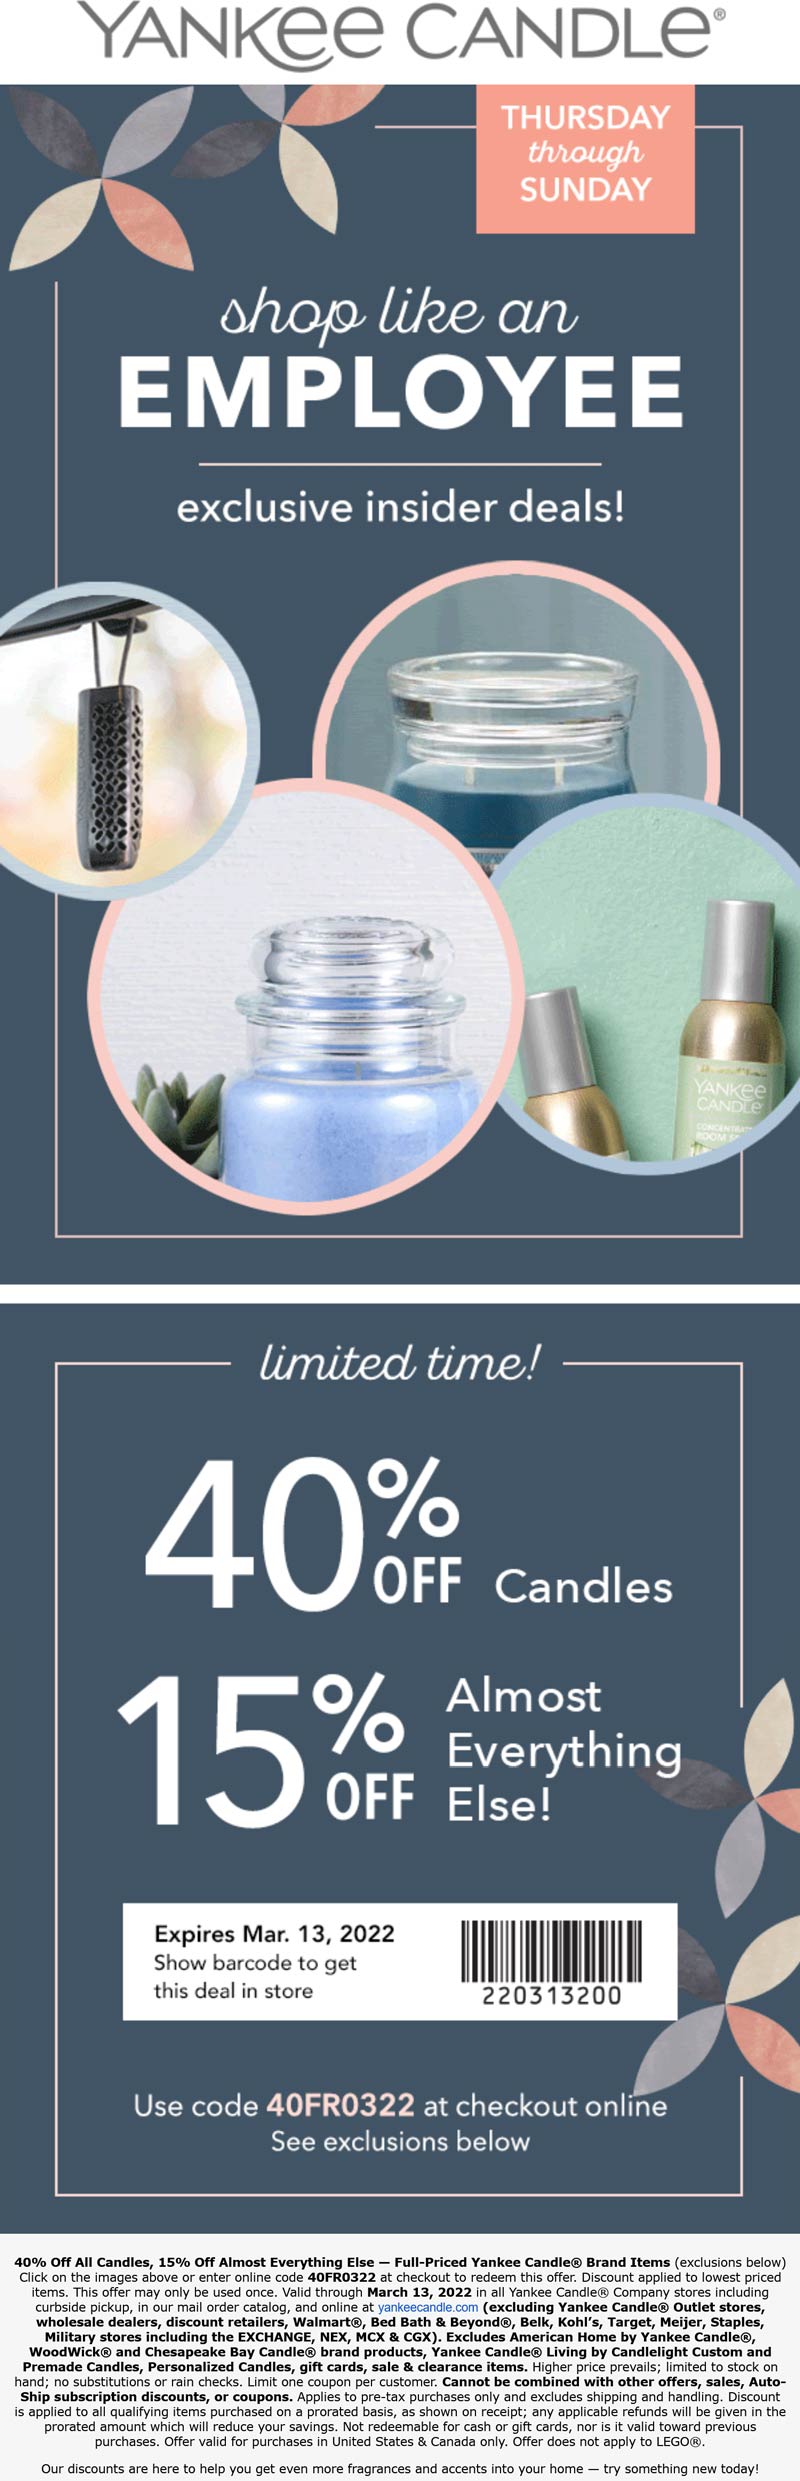 Yankee Candle stores Coupon  15% off everything & 40% off candles at Yankee Candle, or online via promo code 40FR0322 #yankeecandle 